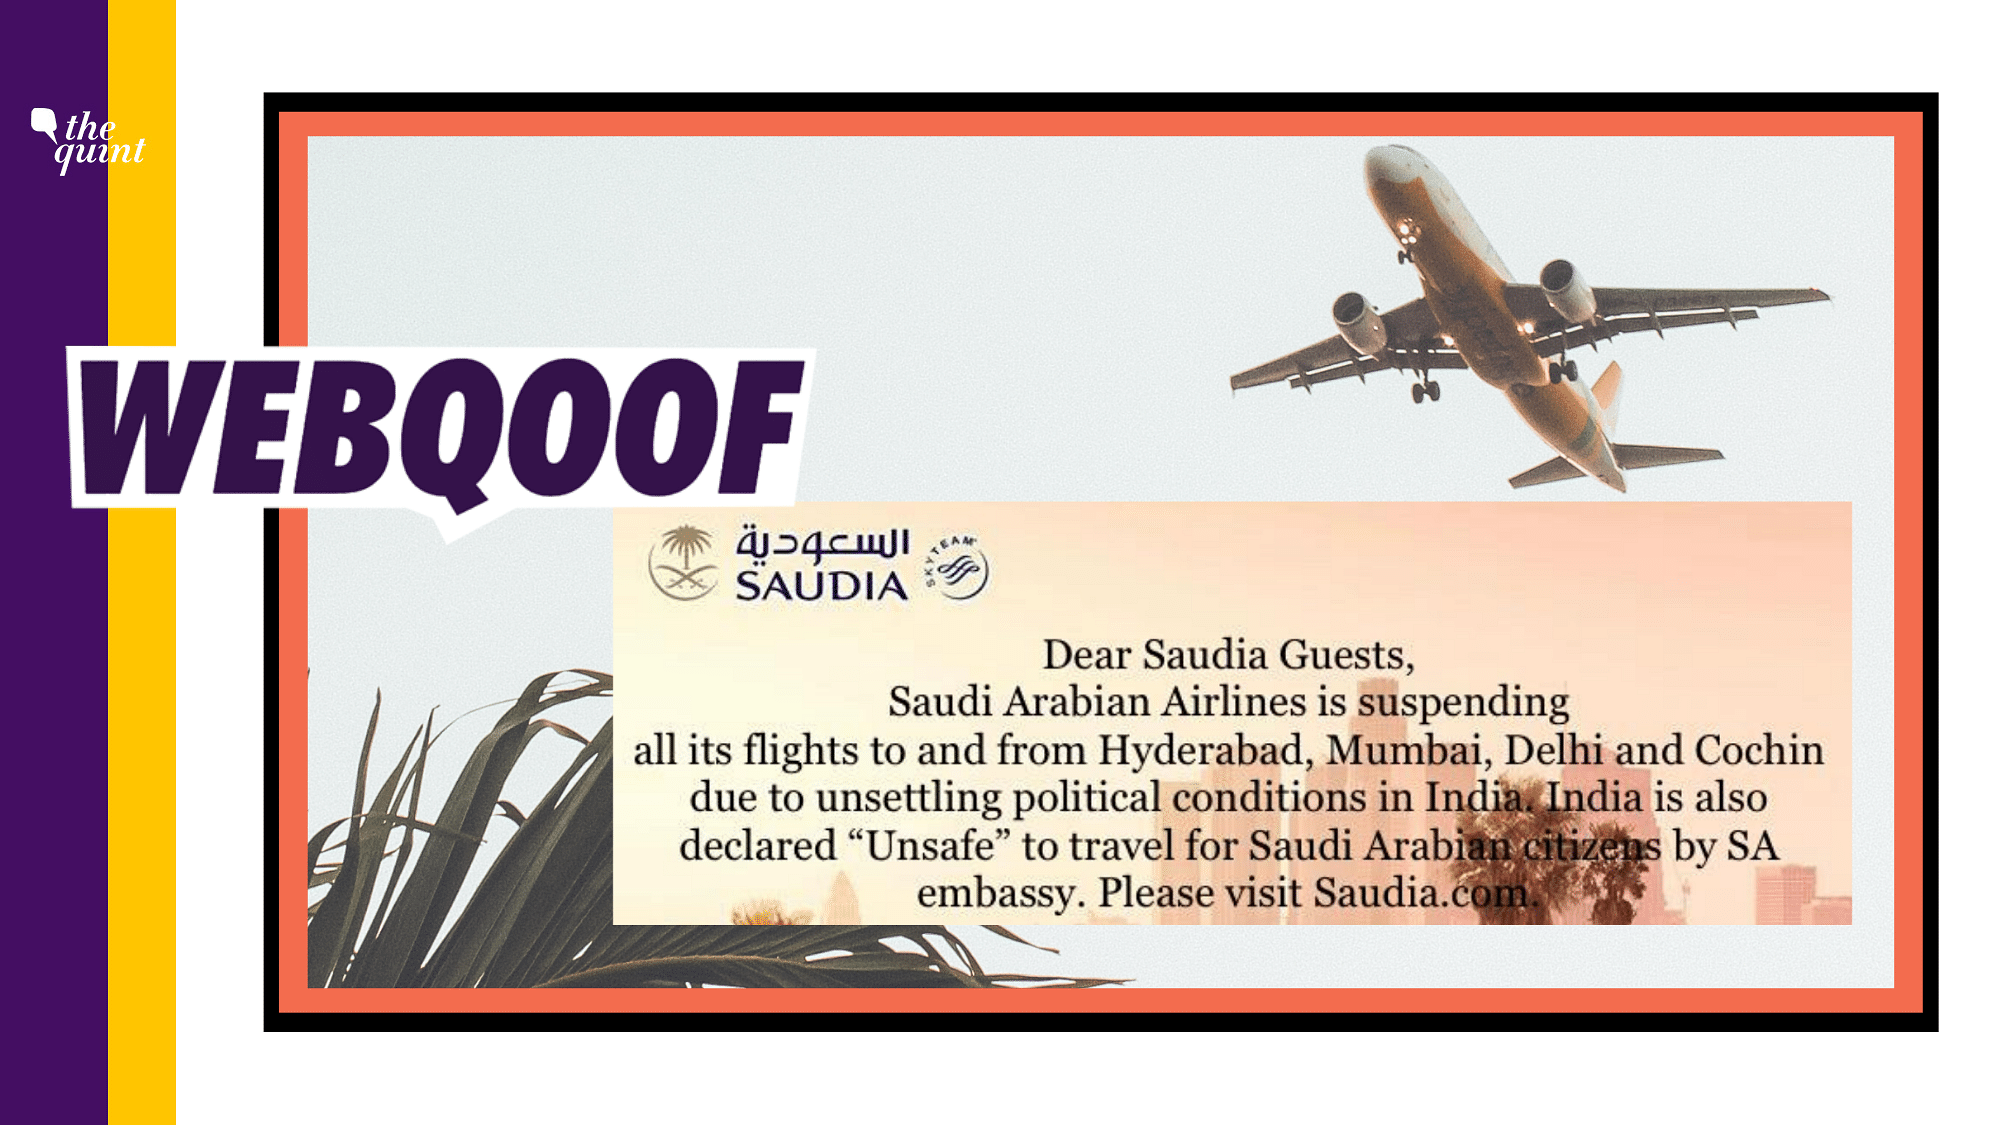 Screenshot of the image with the claimed text that the Saudi Arabian Airlines is suspending all its flight to India.&nbsp;